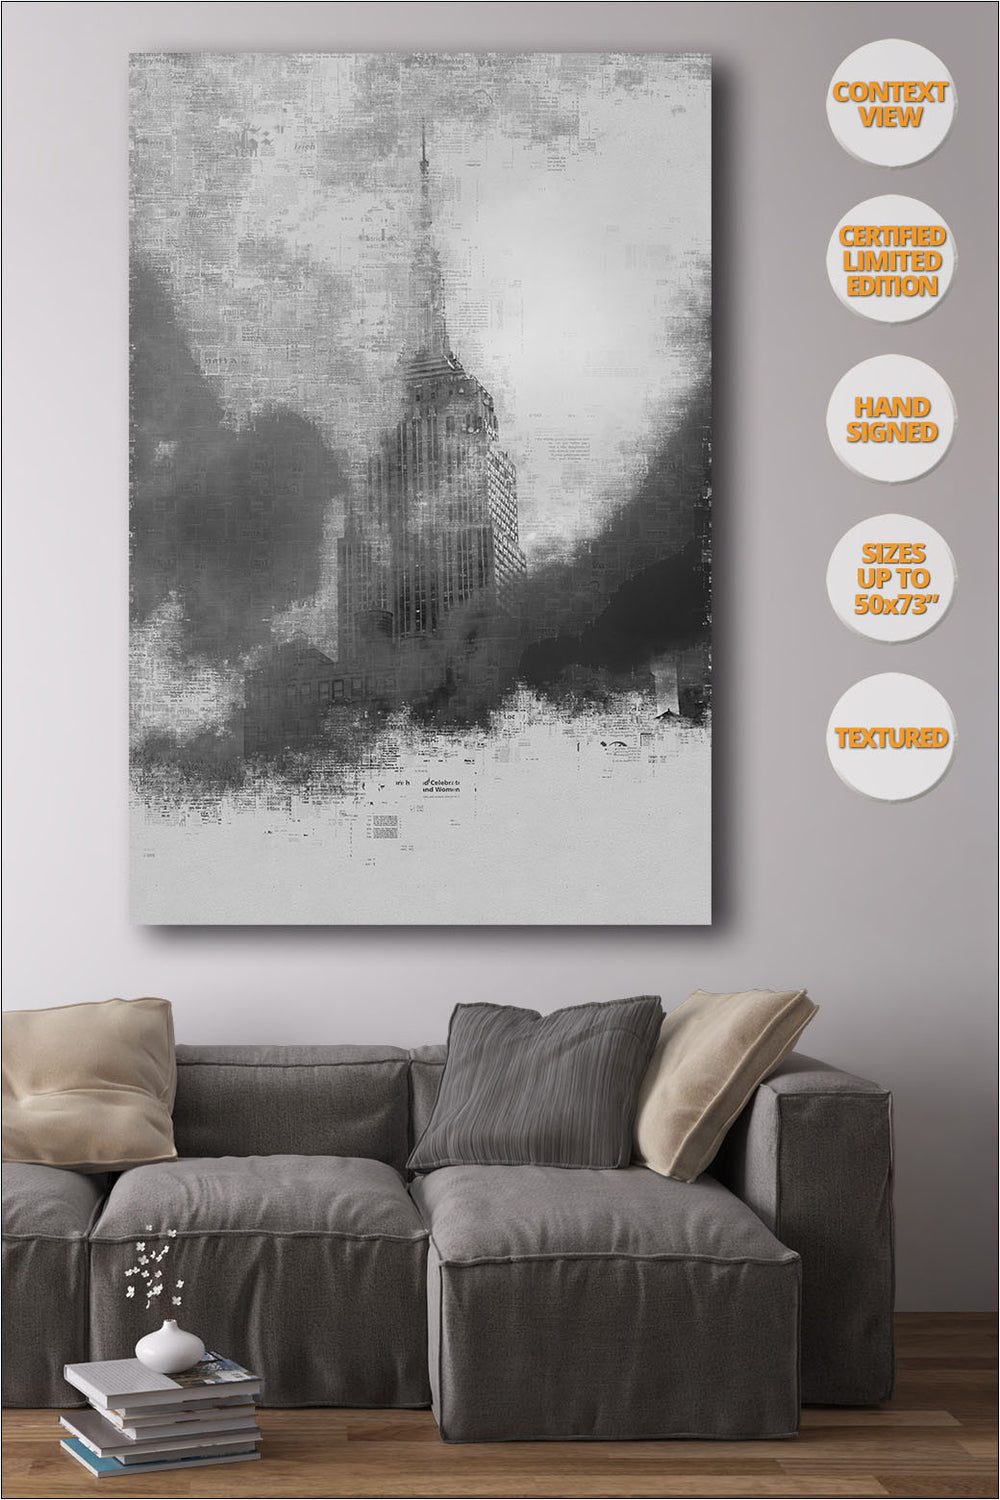 The Empire State, Manhattan, New York. | Print hanged in dining room.